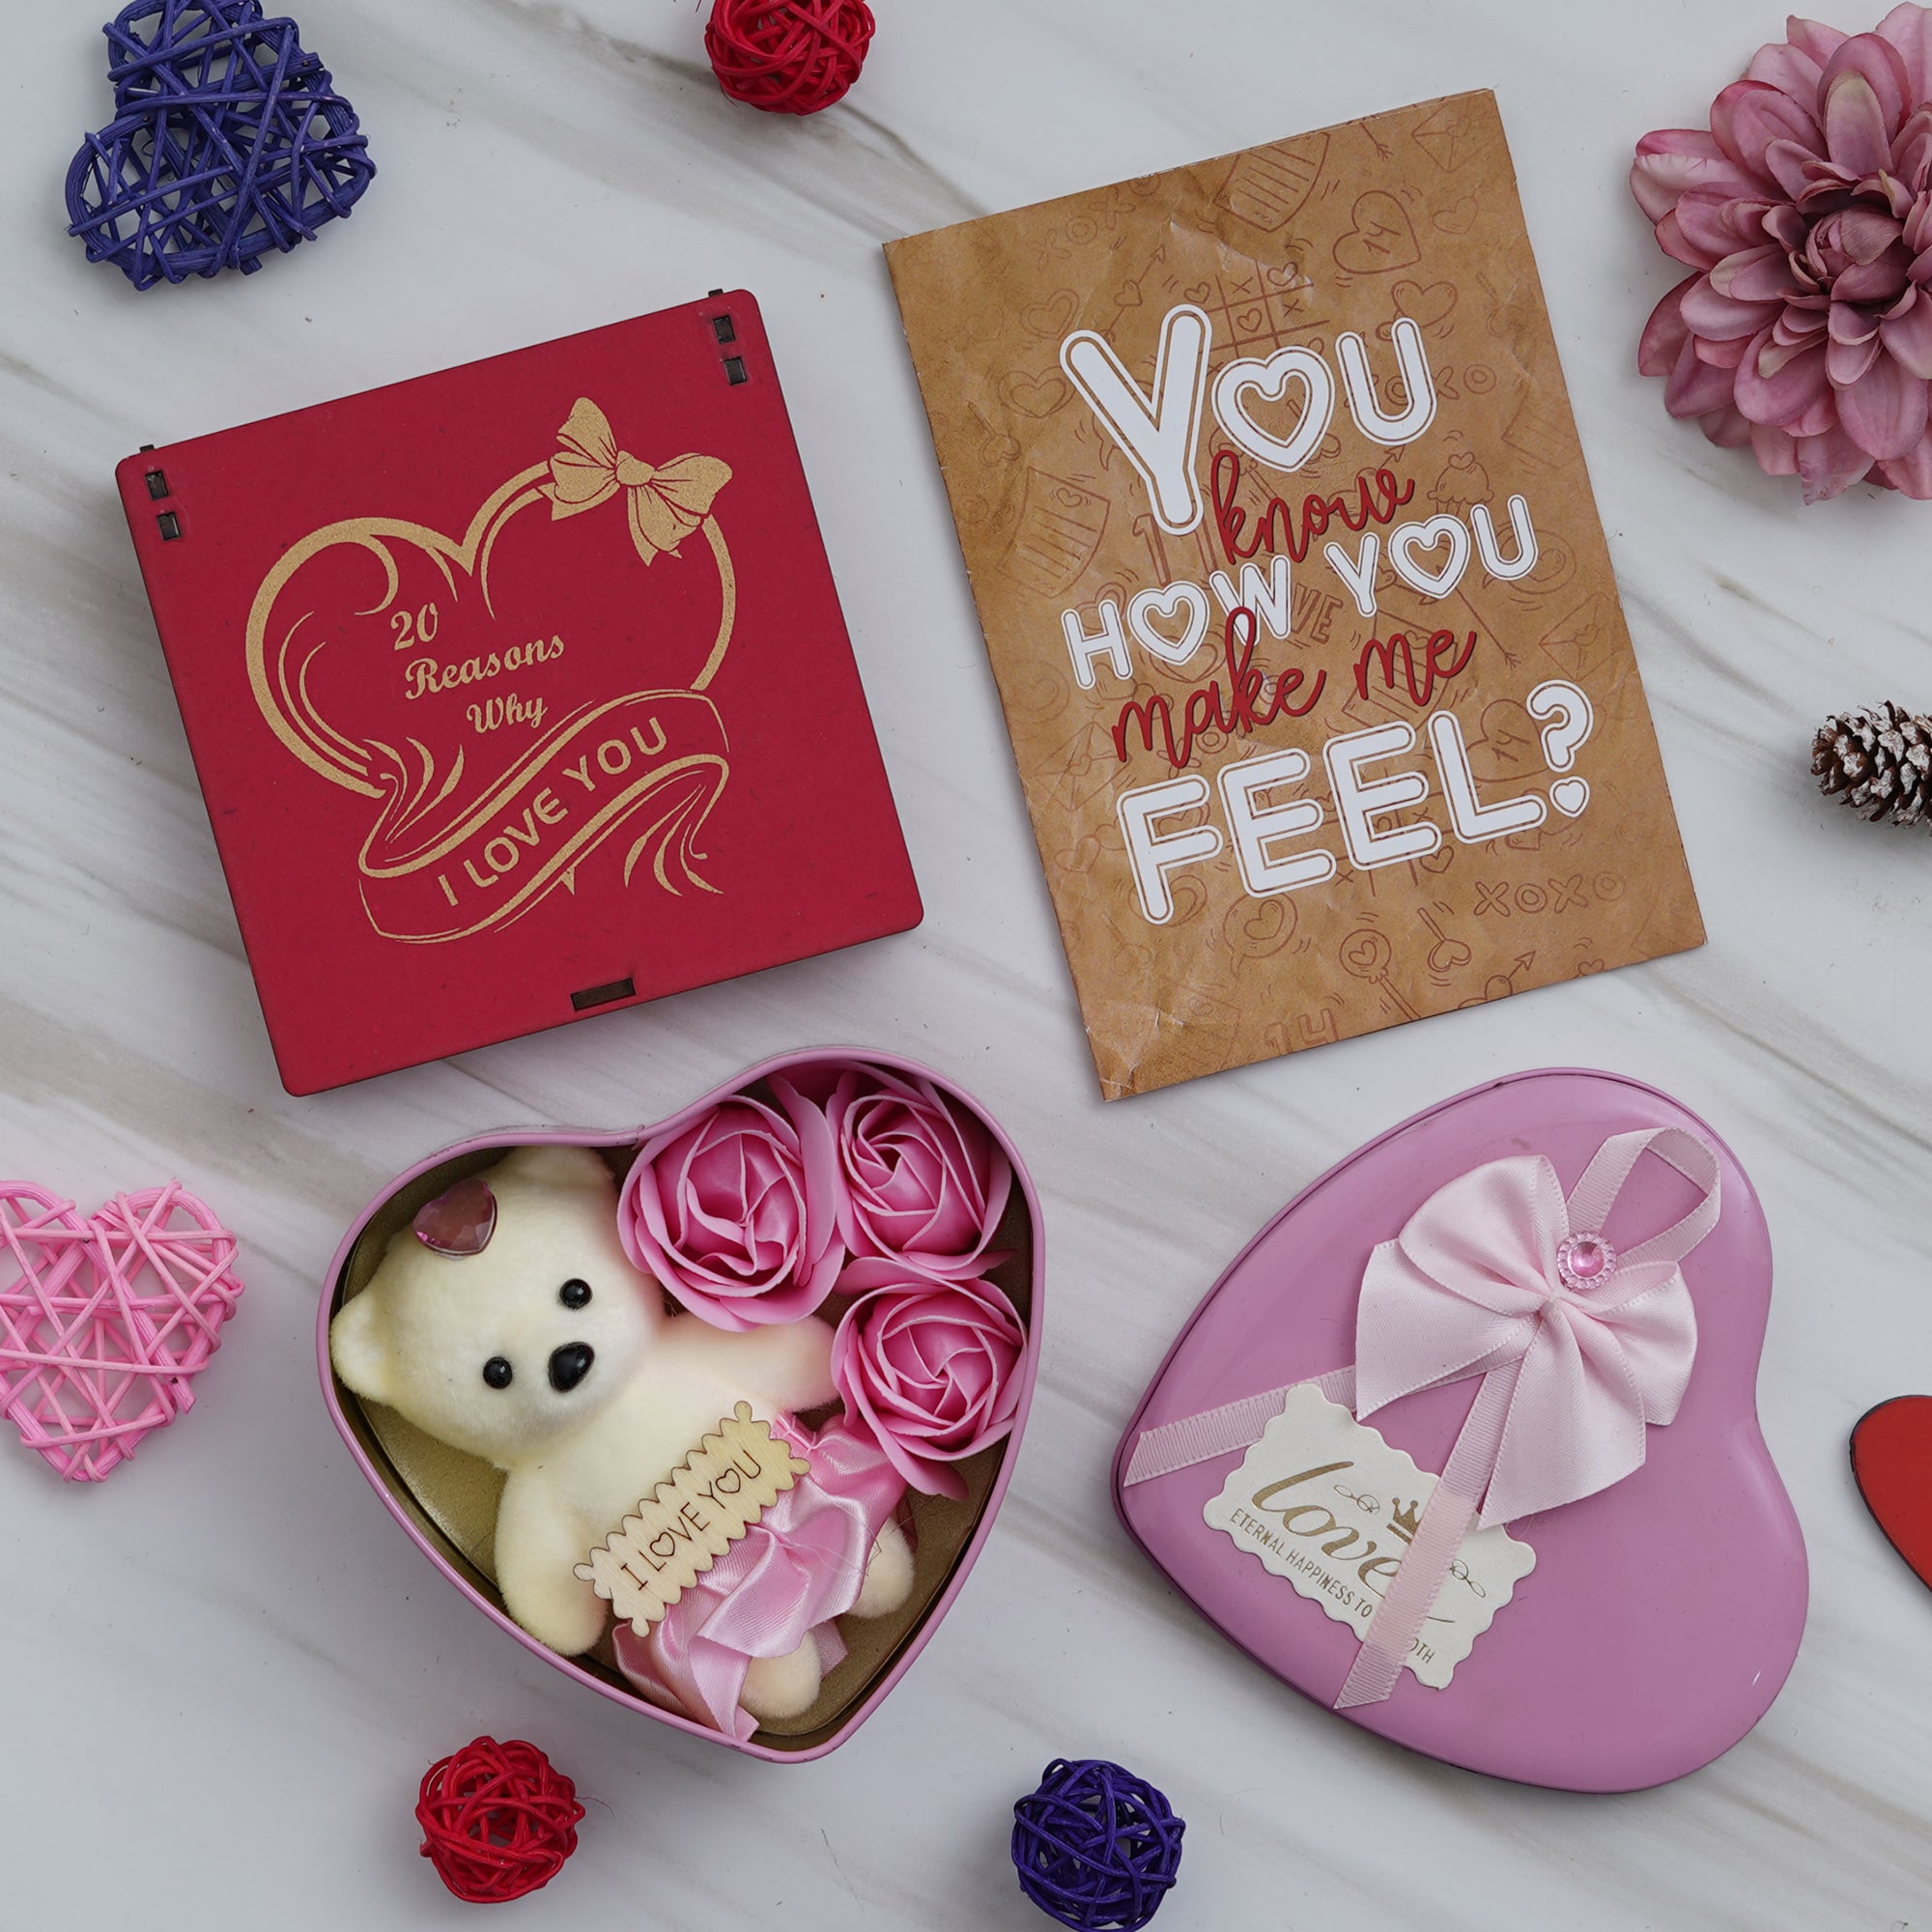 Valentine Combo of Card, "20 Reasons Why I Love You" Printed on Little Red Hearts Decorative Wooden Gift Set Box, Pink Heart Shaped Gift Box with Teddy and Roses